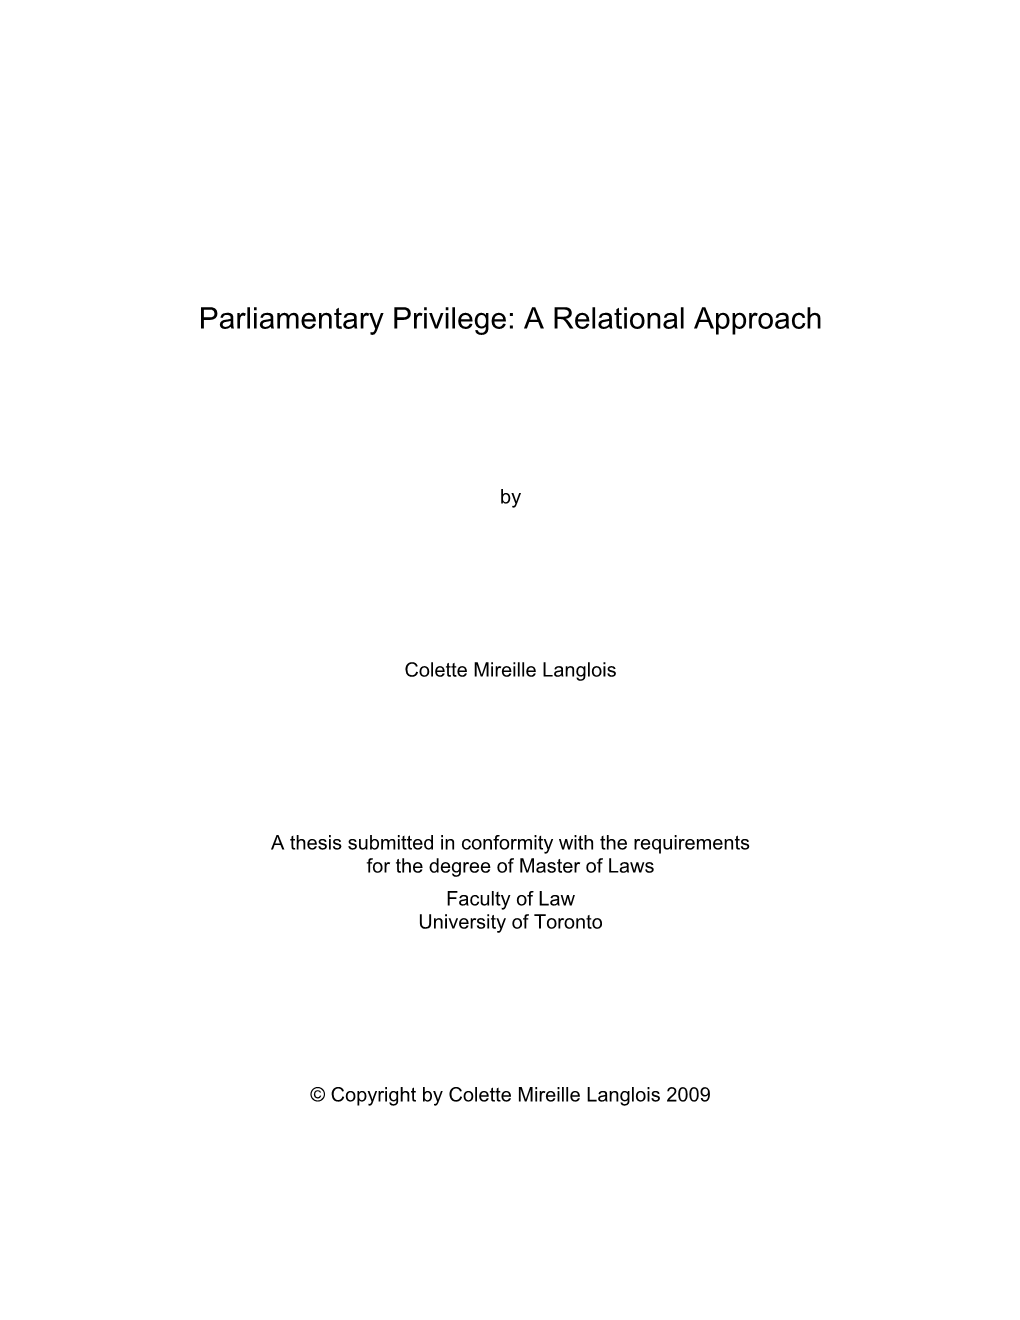 Parliamentary Privilege: a Relational Approach